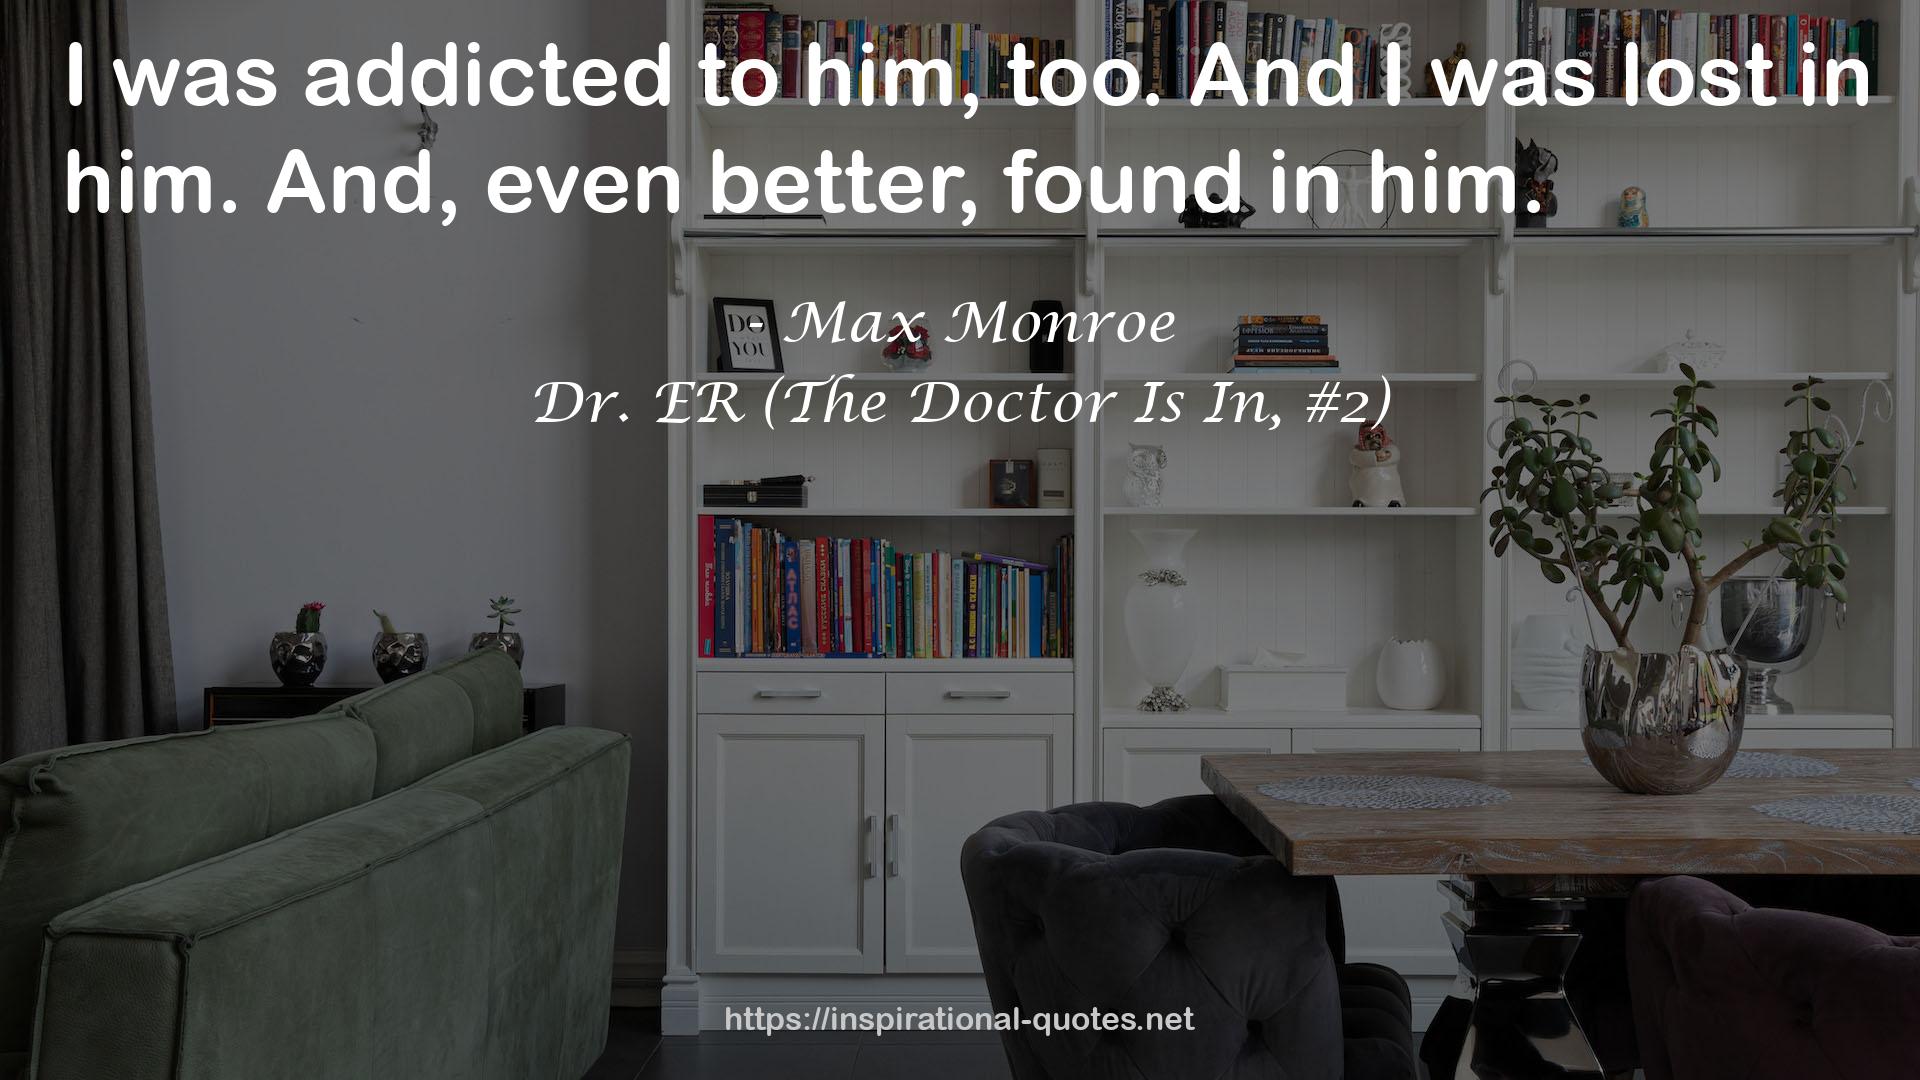 Dr. ER (The Doctor Is In, #2) QUOTES